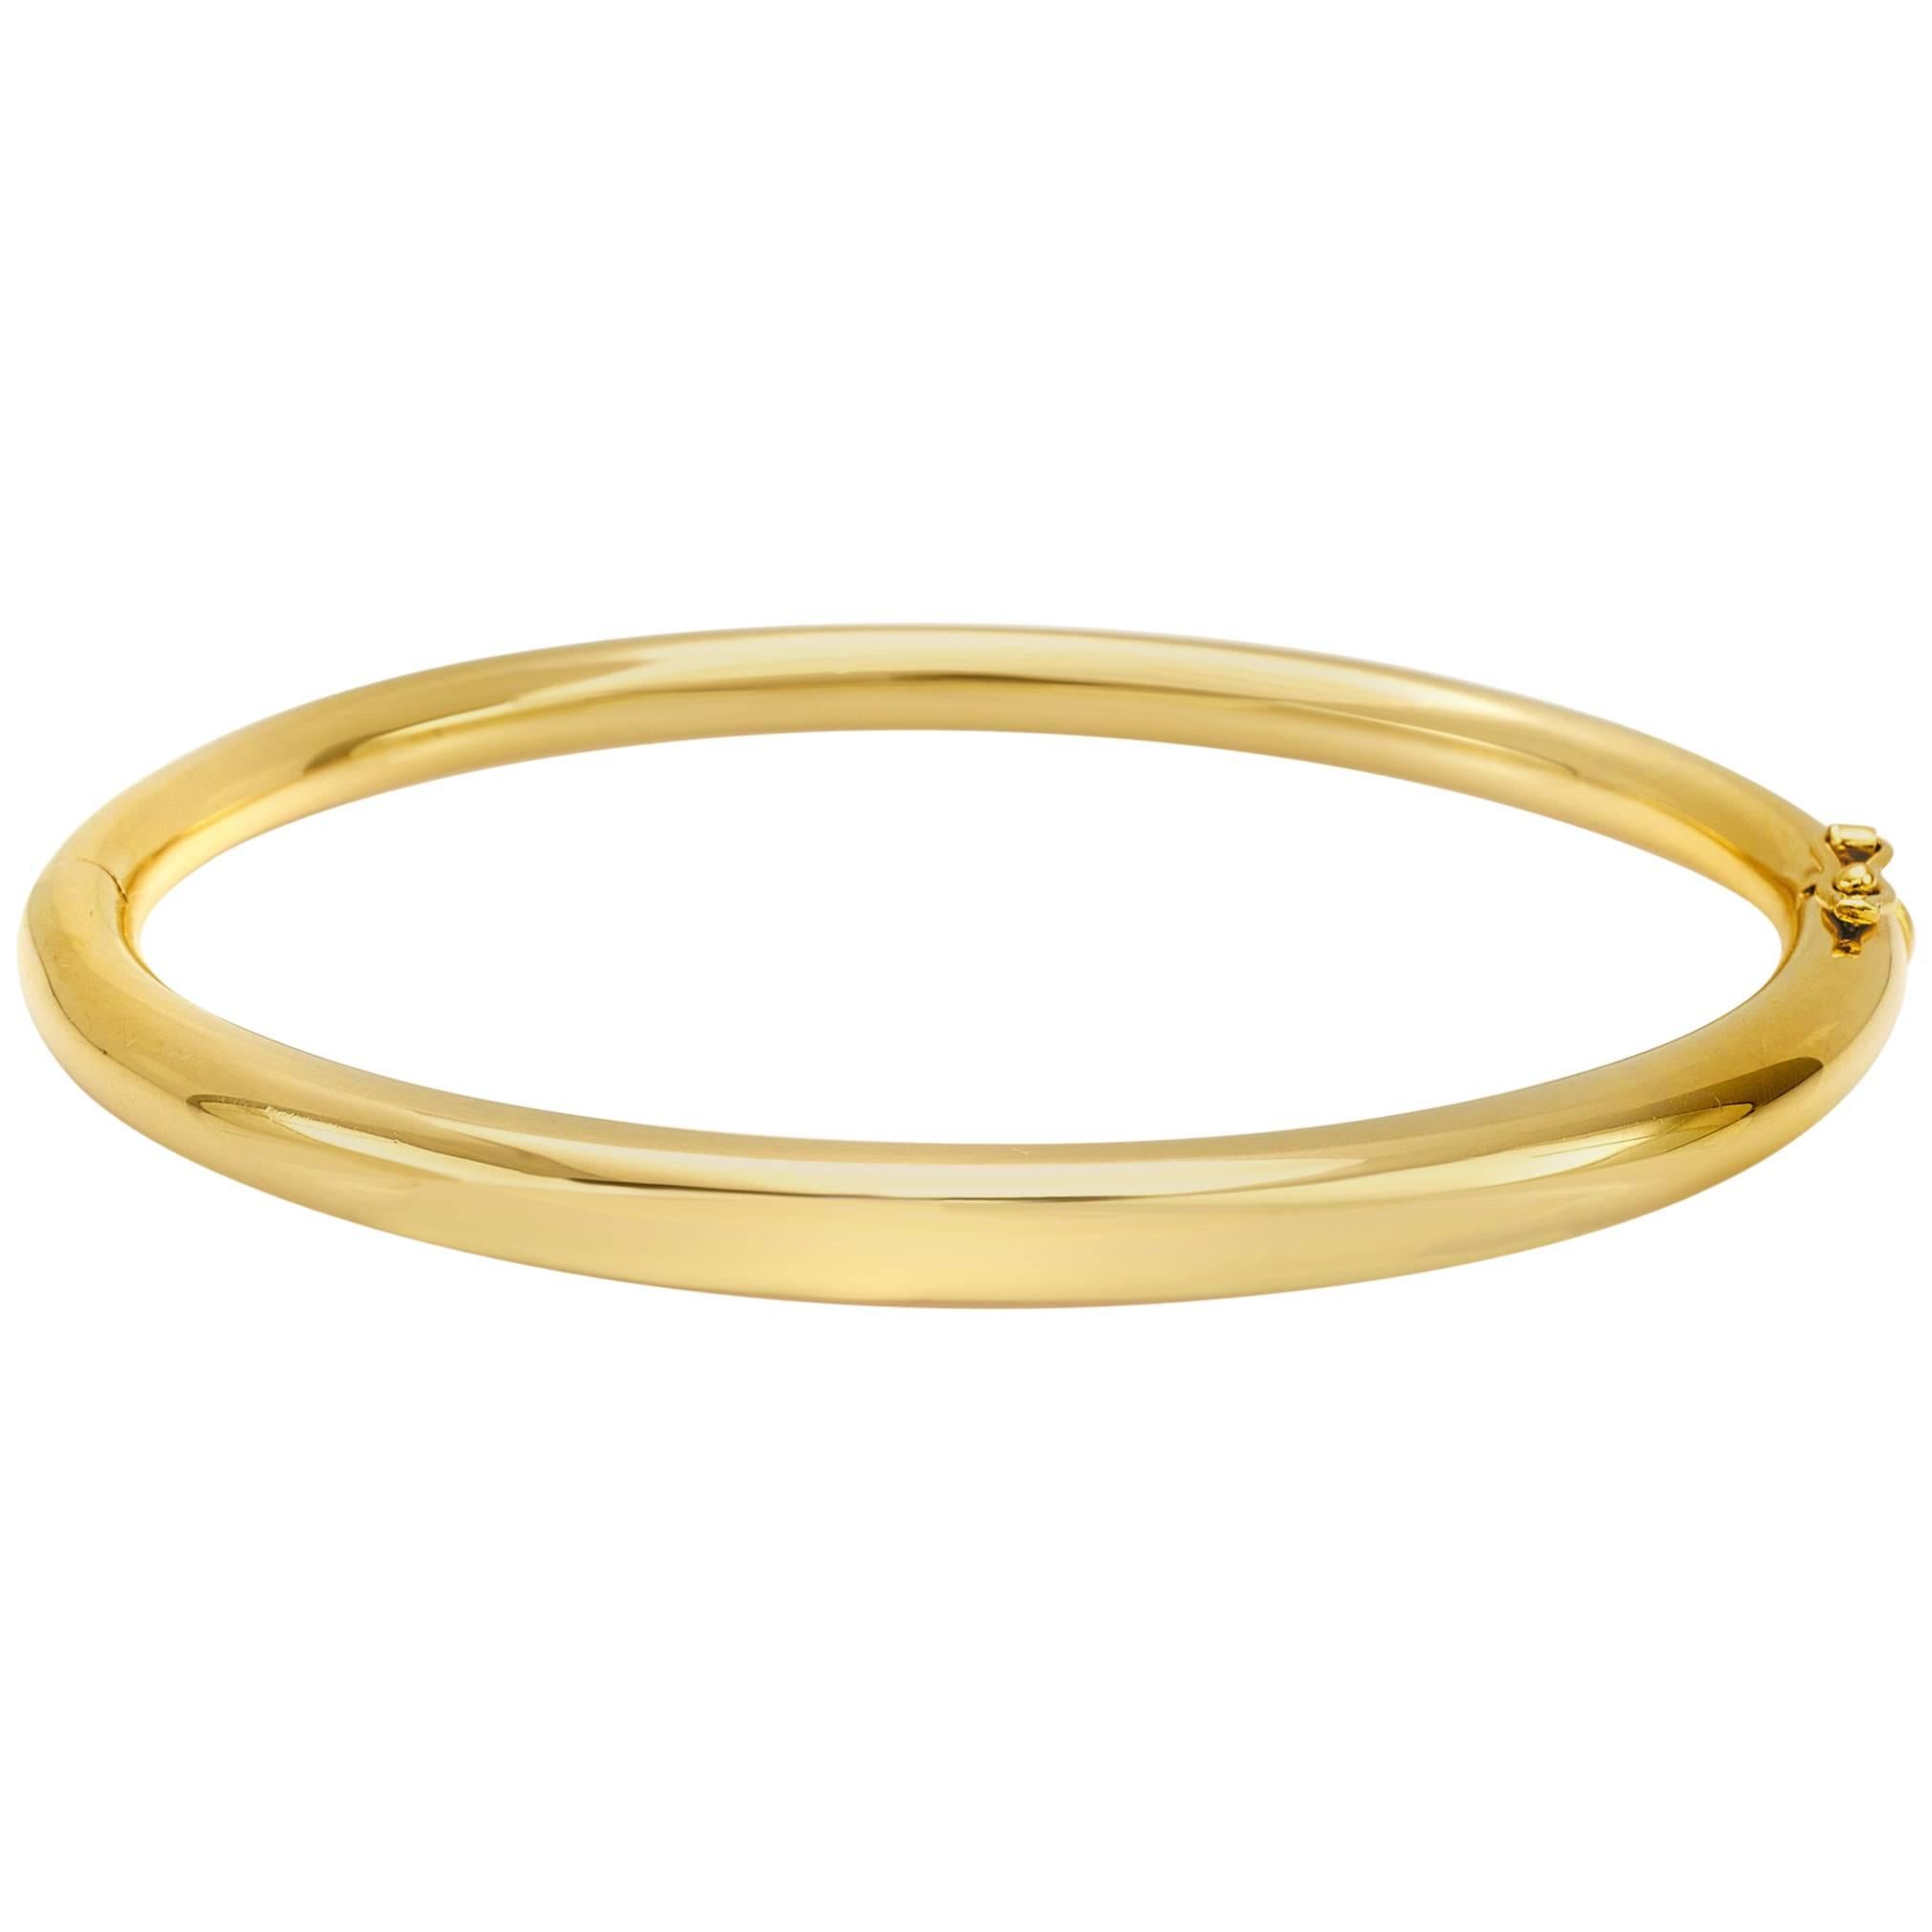 Bangle from the Collection "Essence" 18 Karat Yellow Gold